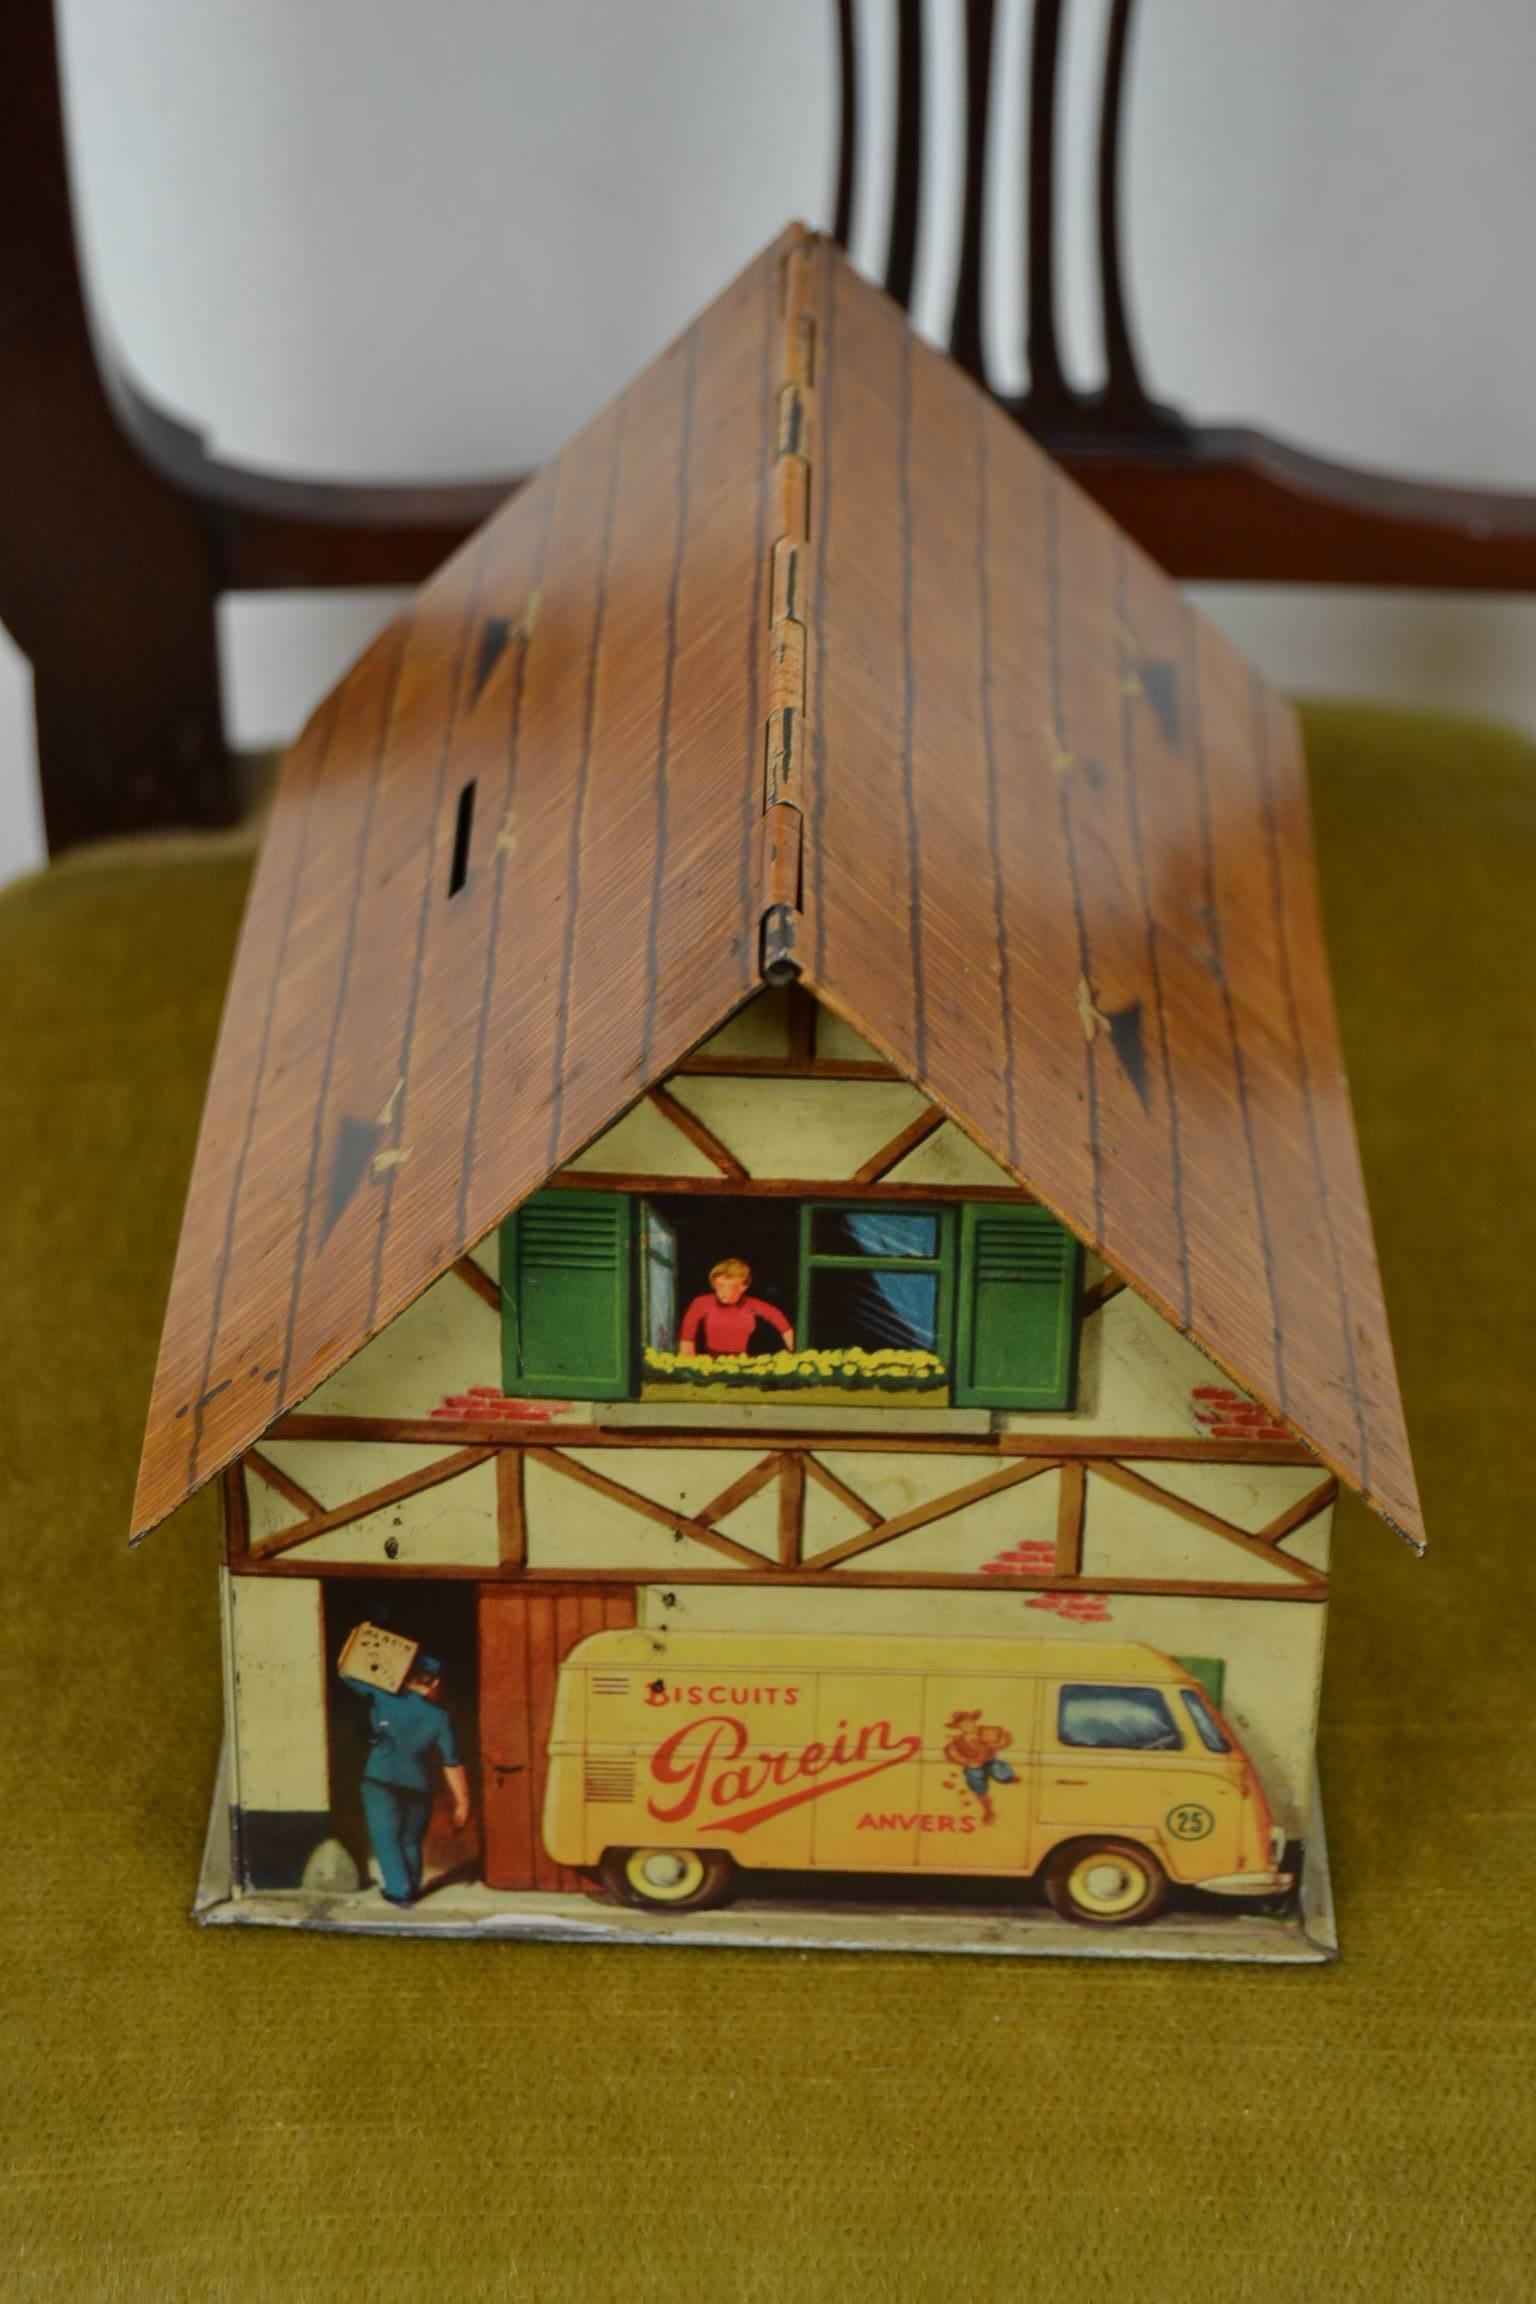 Farmhouse biscuit tin - house biscuit tin with VW bus. 
A late 1940s biscuit tin made for the Belgian Biscuit Company Parein.
The Parein Biscuit Company was located in Antwerp.
This litho biscuit tin storage box was designed by L.Ruymen; his